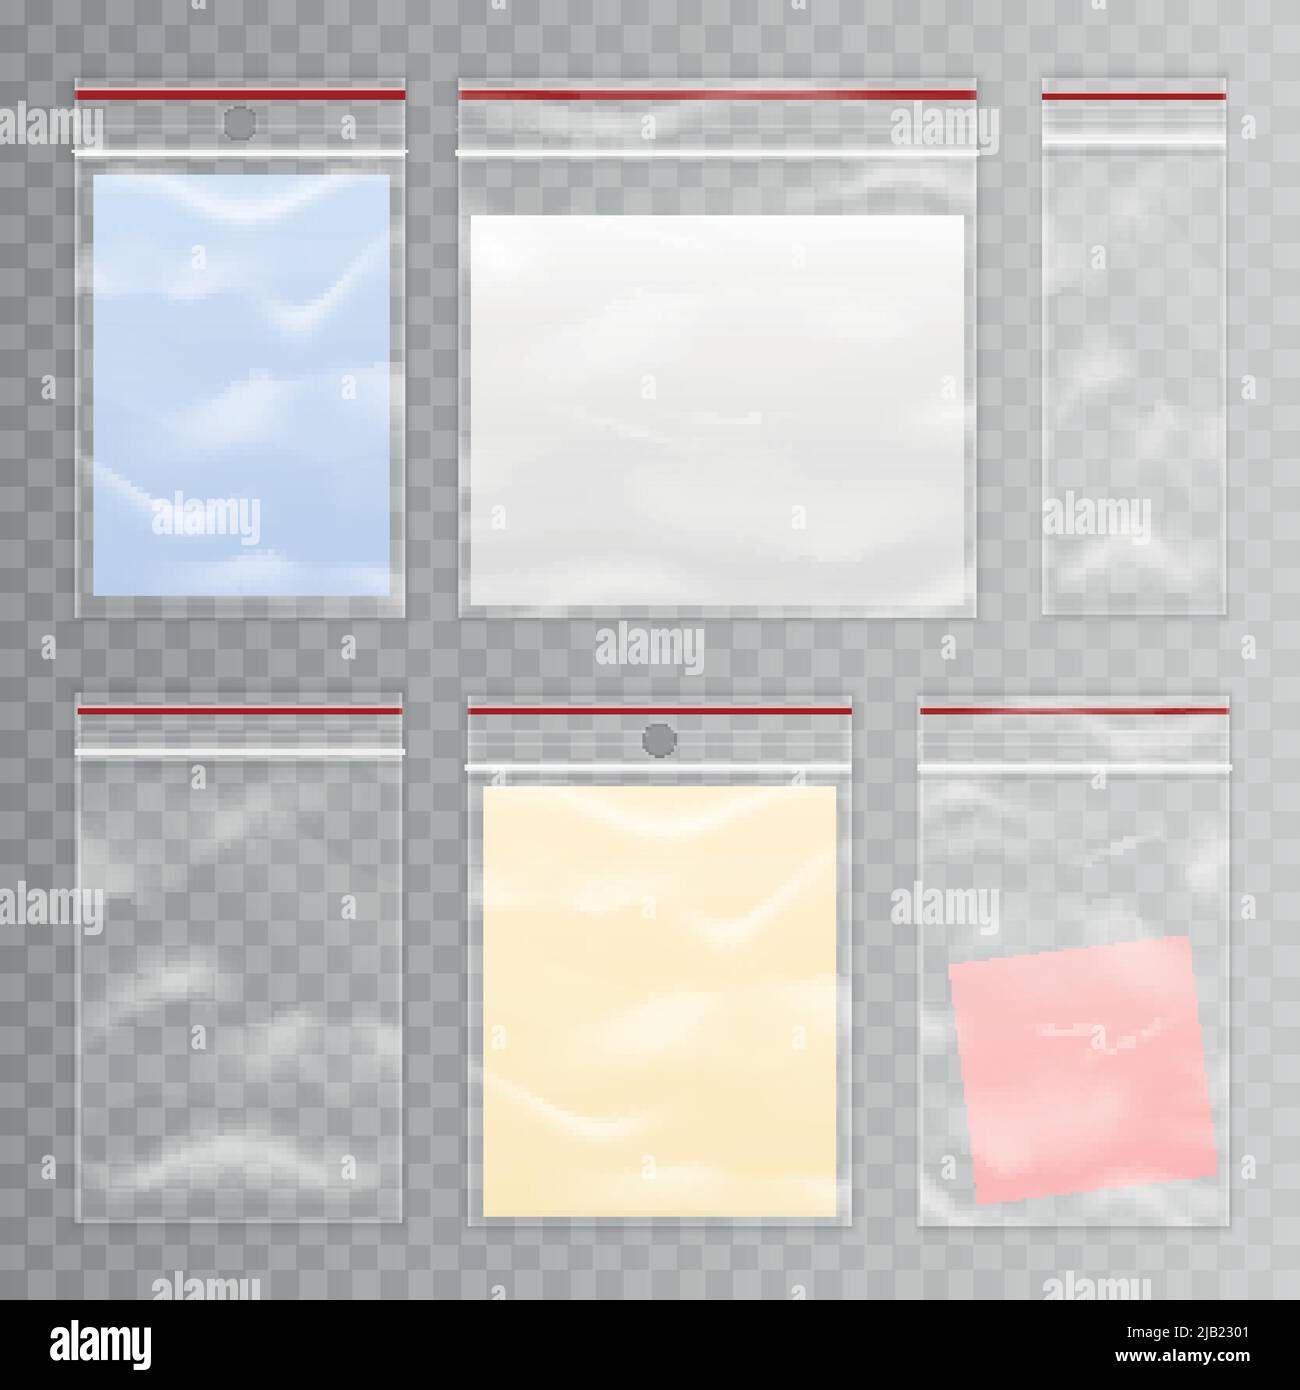 Realistic colored full and empty plastic bag icon set on transparent background vector illustration Stock Vector